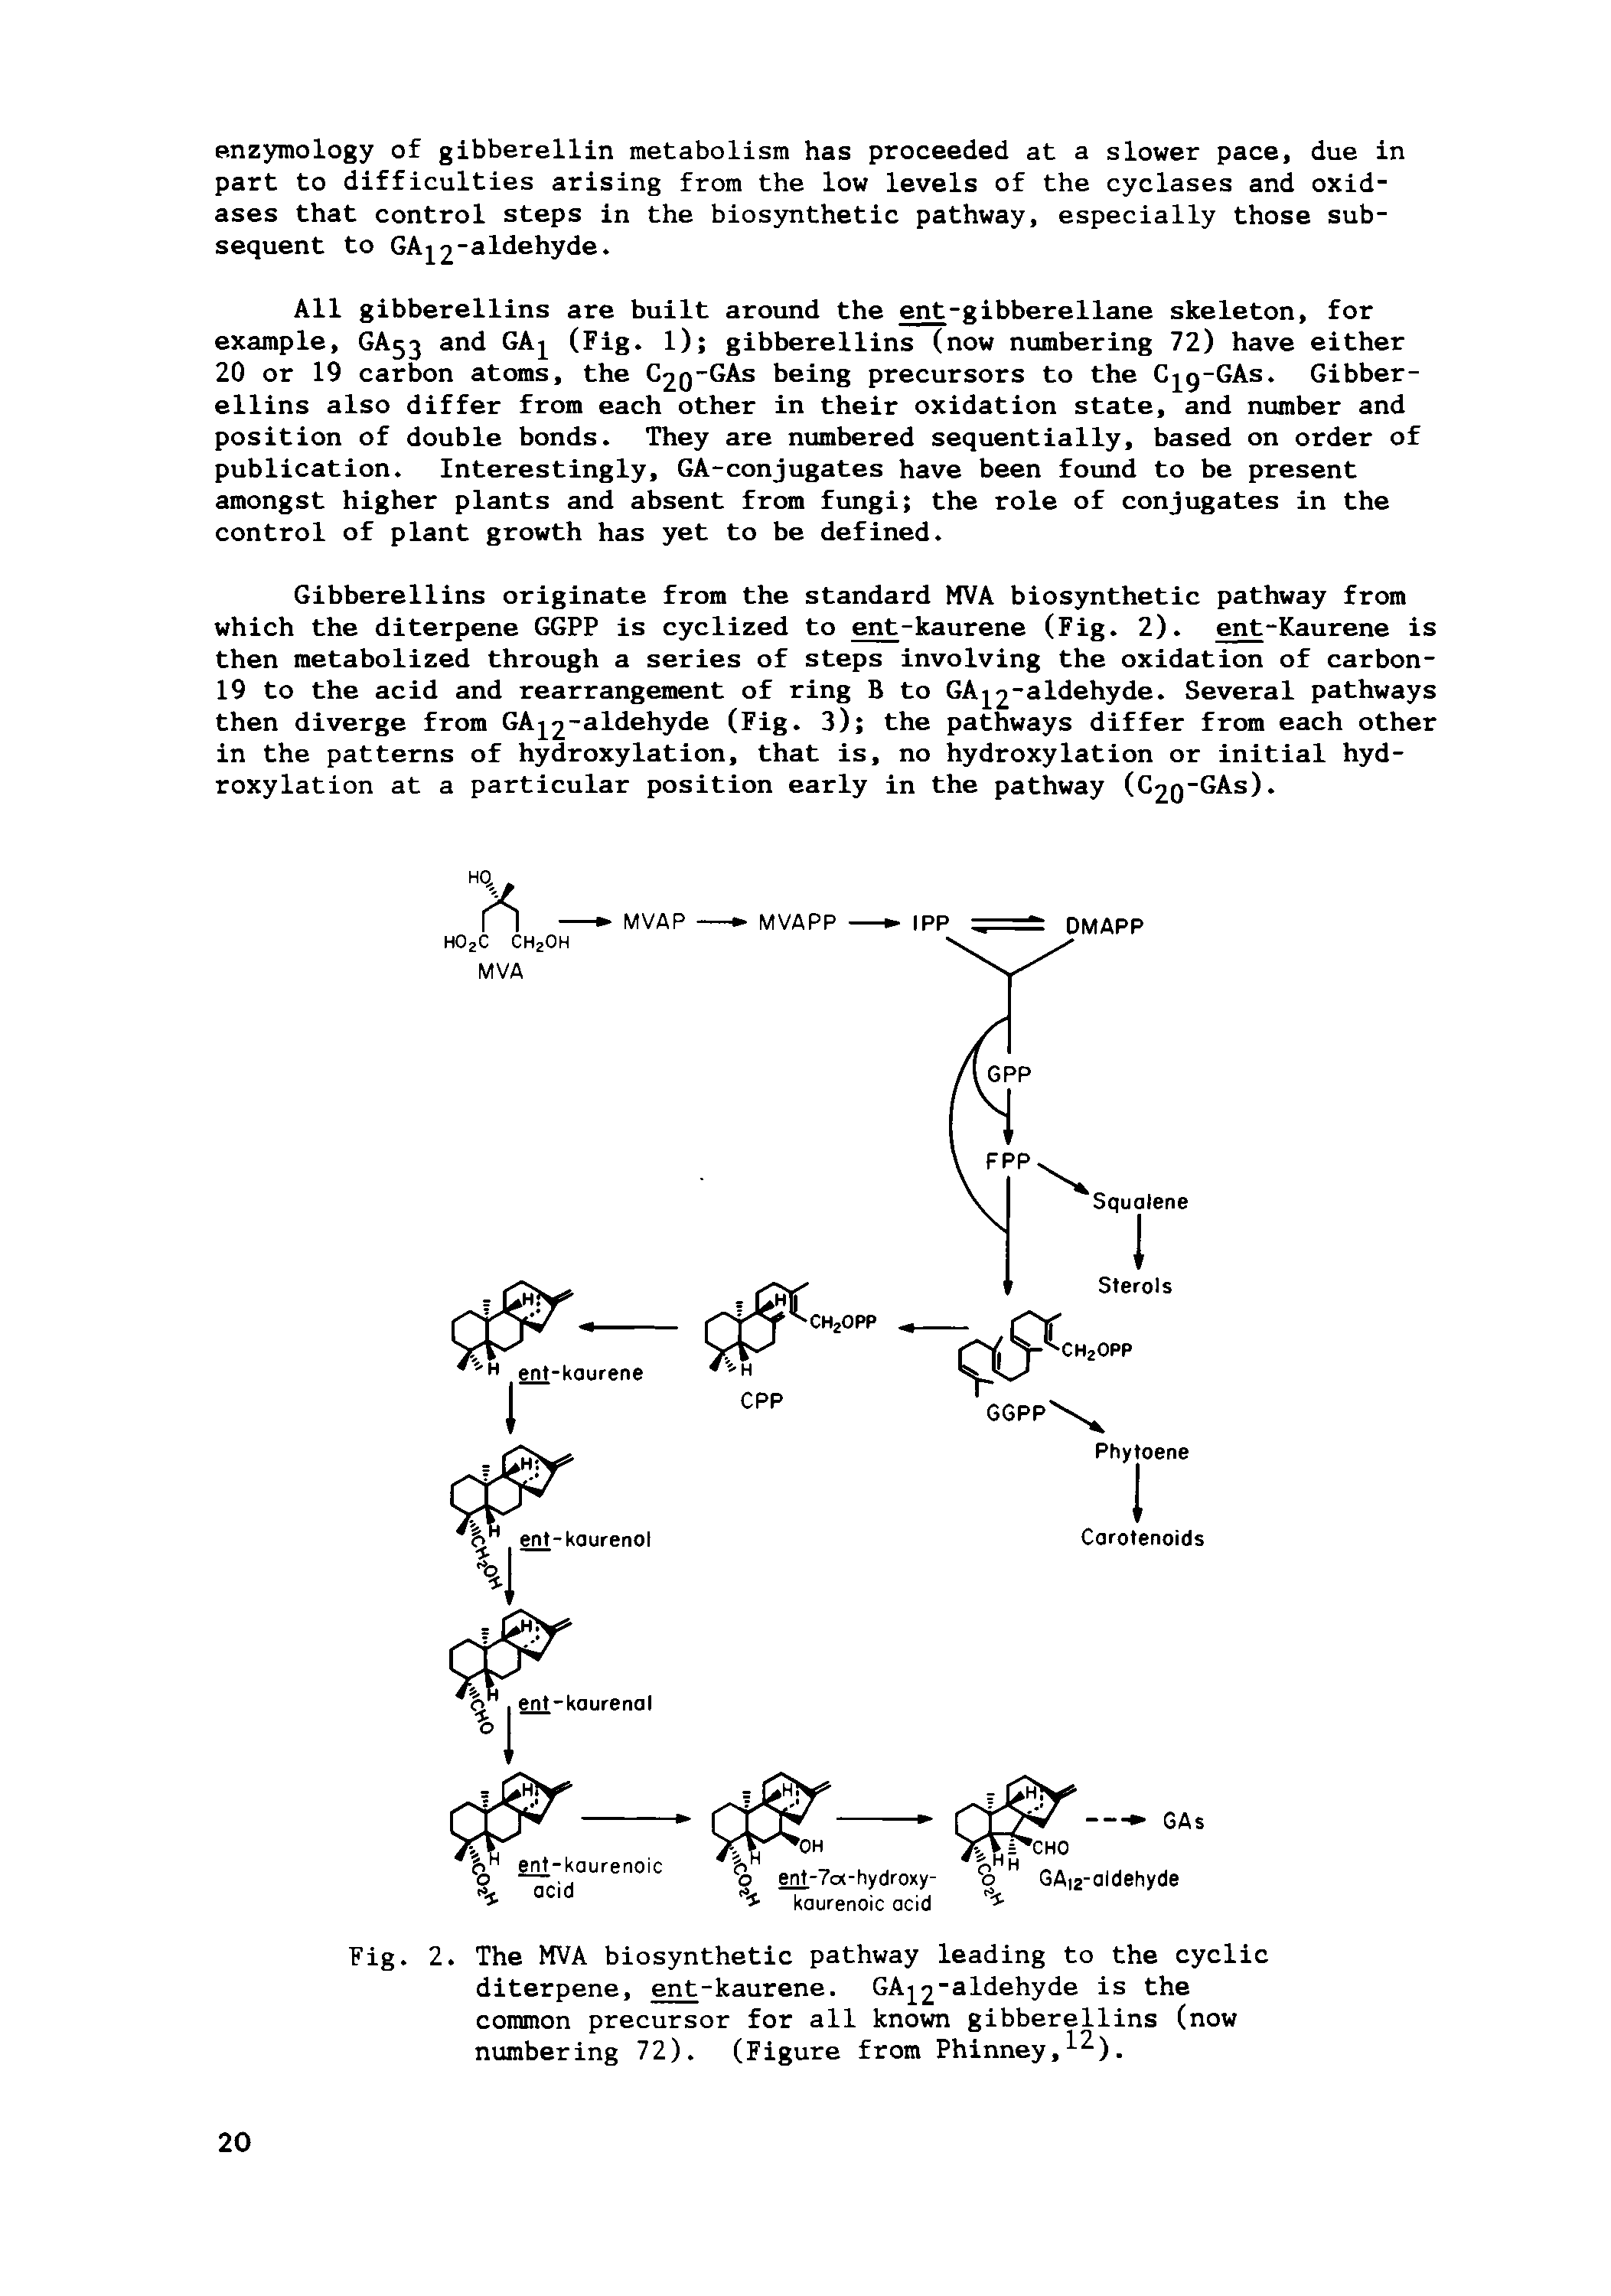 Fig. 2. The MVA biosynthetic pathway leading to the cyclic diterpene, ent-kaurene. GAj 2" ldehyde is the common precursor for all known gibberellins (now numbering 72). (Figure from Phinney, ).